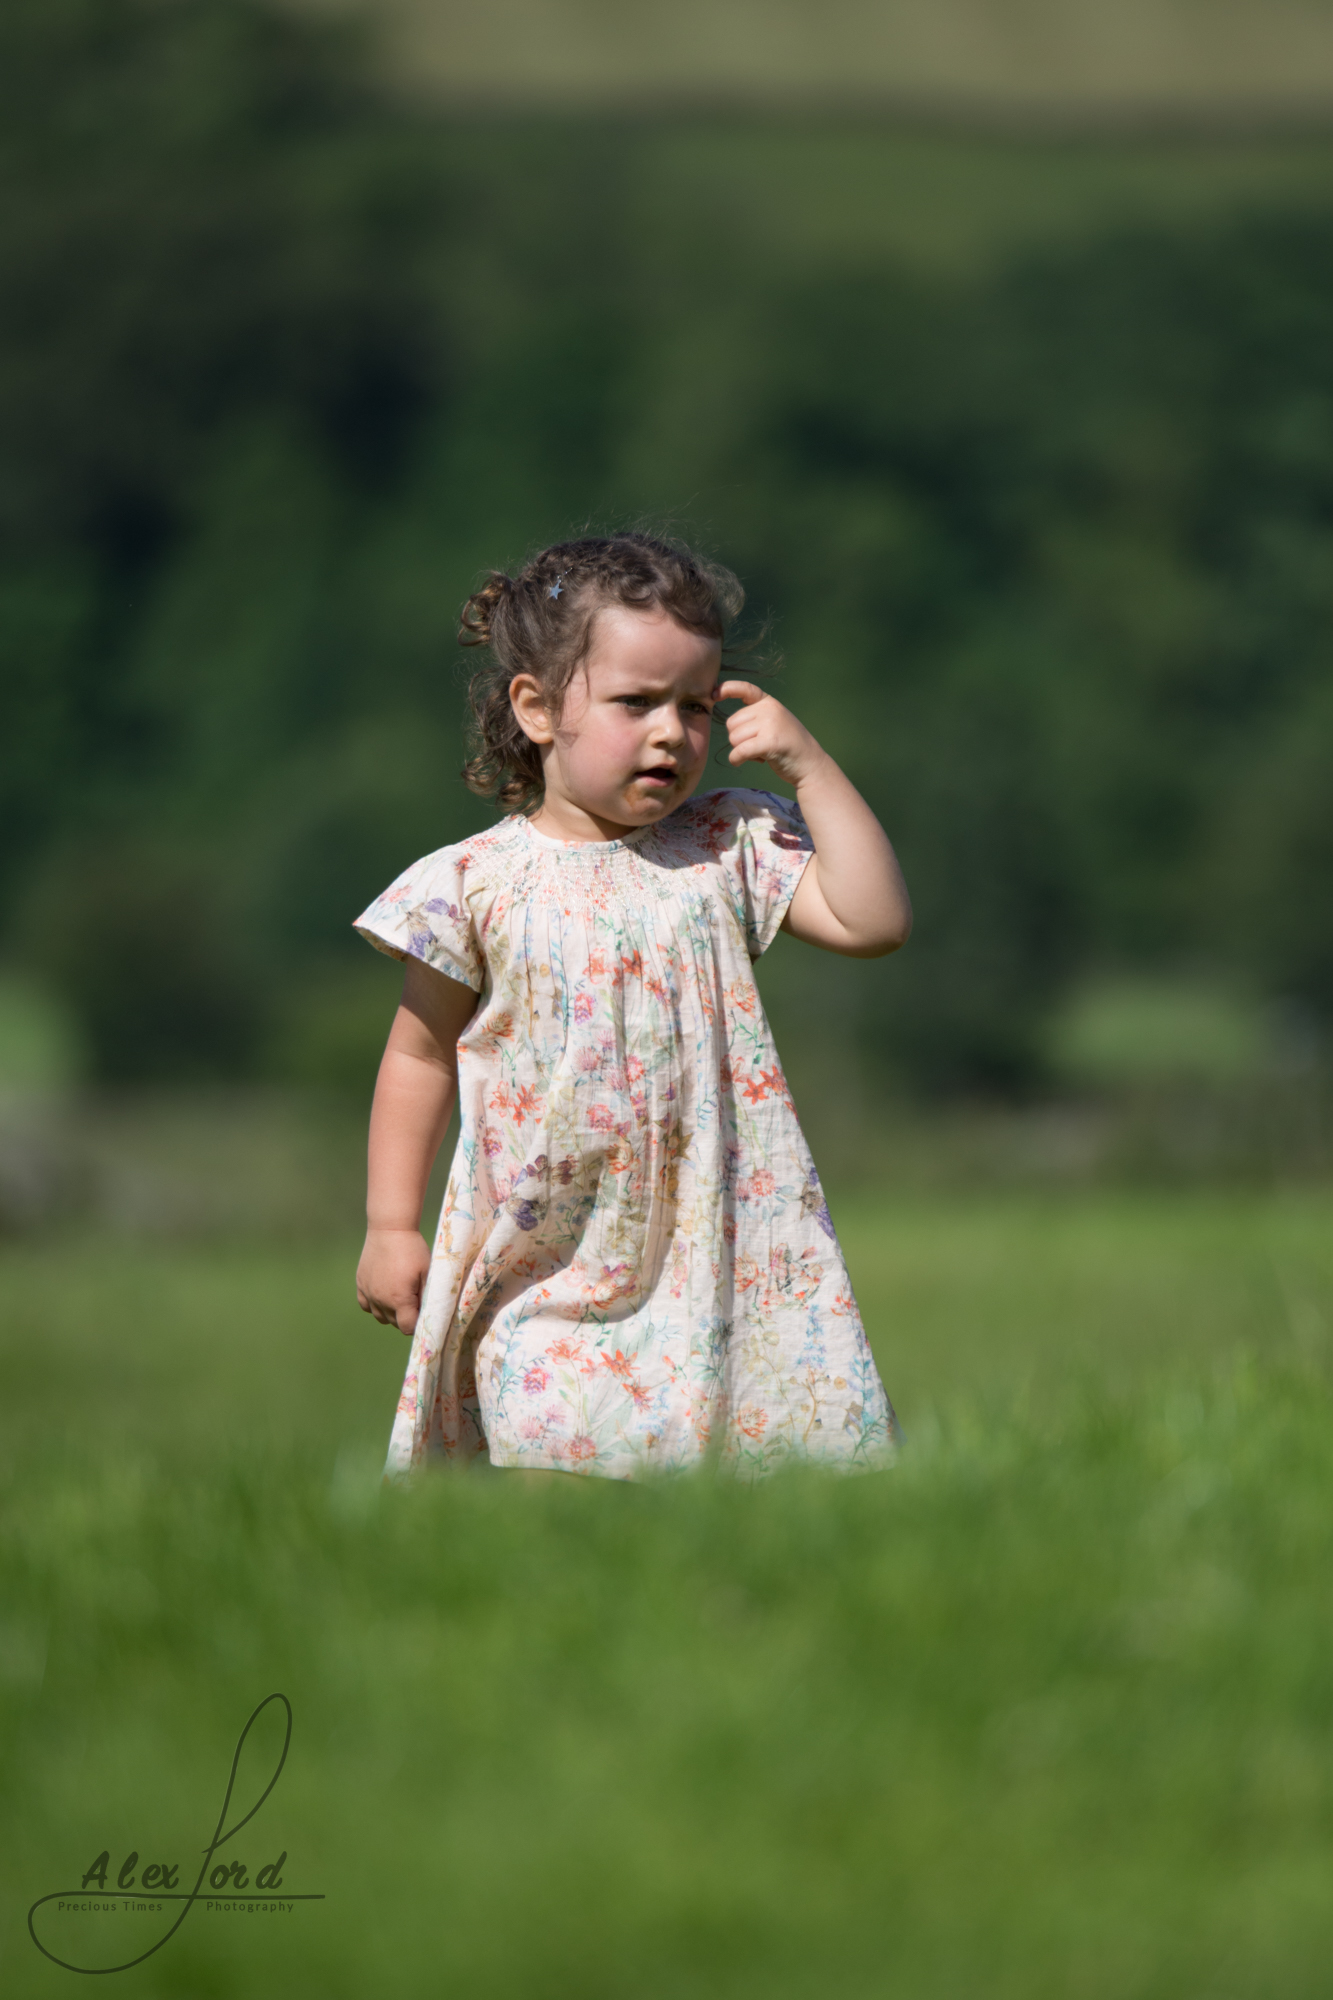 A young girl wedding guest plays in long grass at the Yorkshire wedding venue